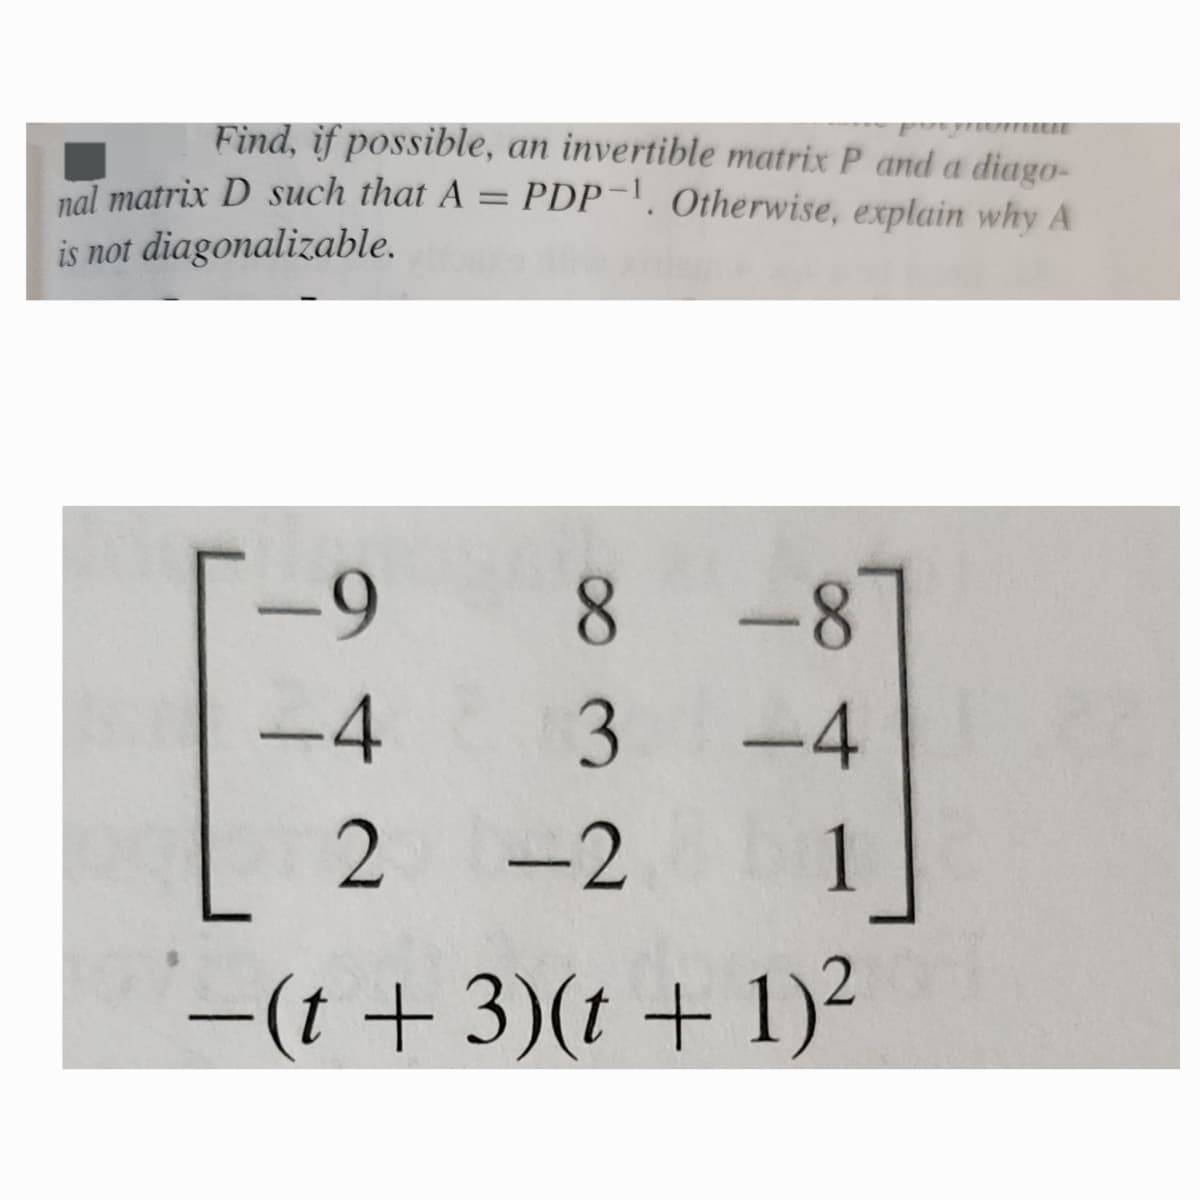 Find, if possible, an invertible matrix P and a diago-
nal matrix D such that A = PDP-. Otherwise, explain why A
is not diagonalizable.
-9
8
-8
-4
3
-4
2 -2
1
-(t+3)(t + 1)²